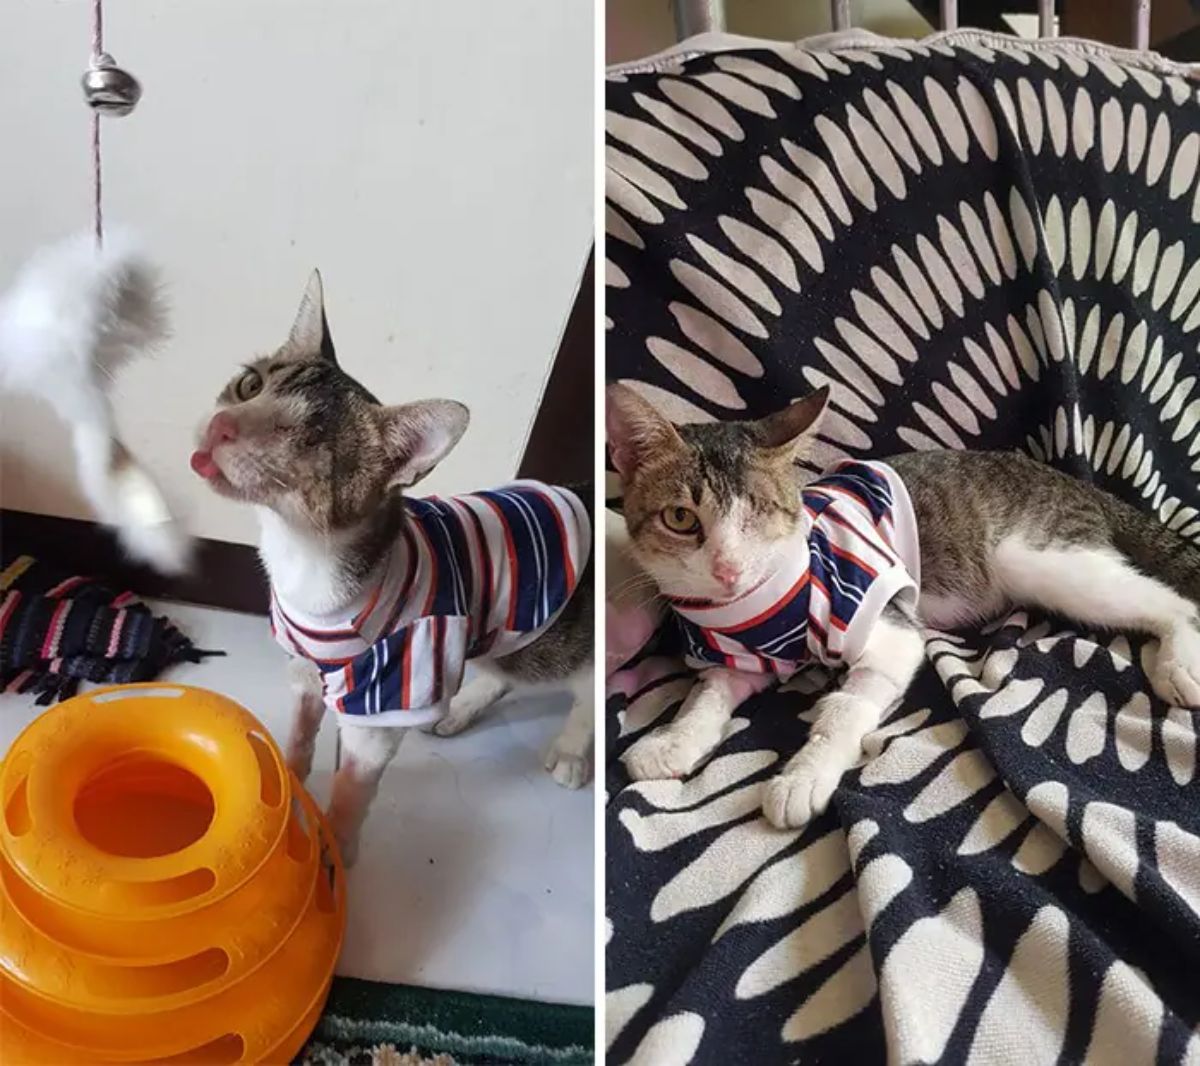 2 photos of a brown and white tabby cat with no left eye wearing a blue red and white shirt